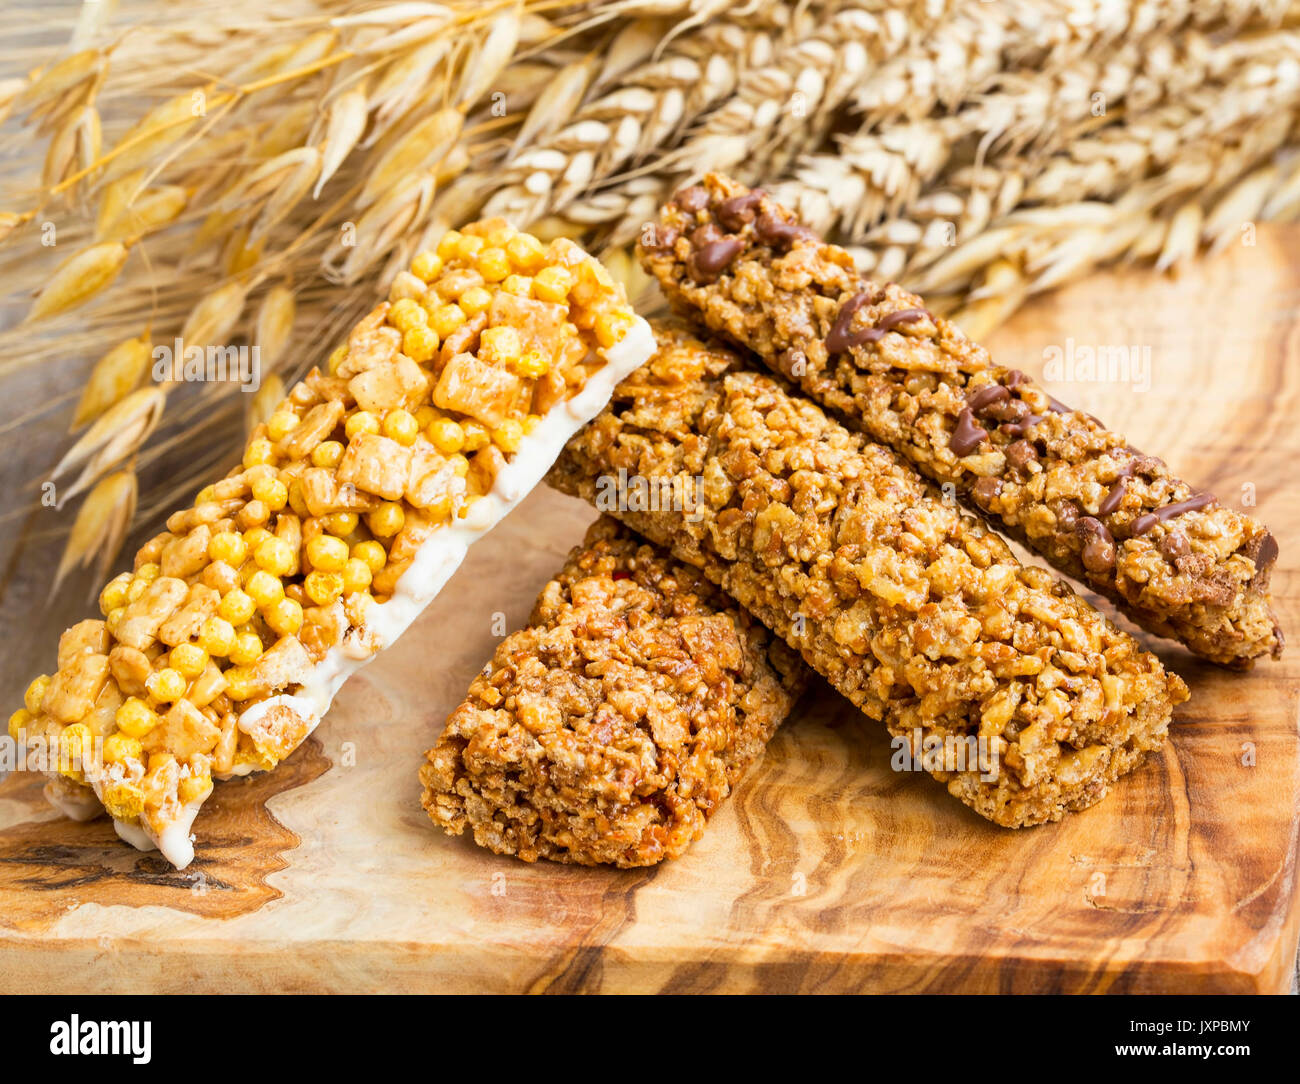 Granola bars .Healthy nuts and cereals protein bars Stock Photo